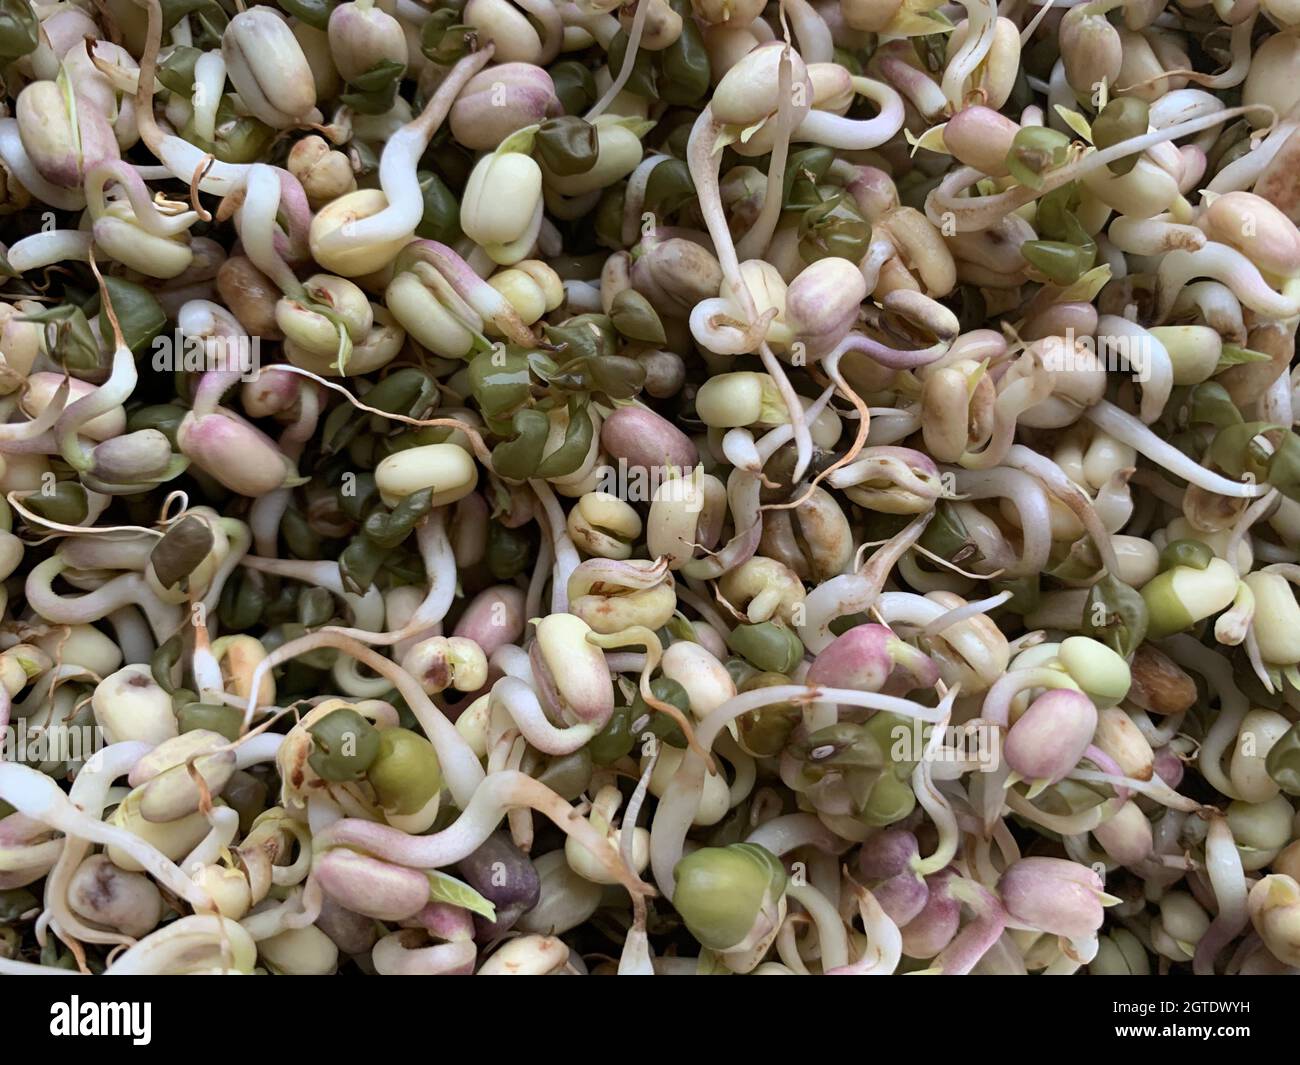 Full Frame Shot Of Sprouted Mungbeans Stock Photo